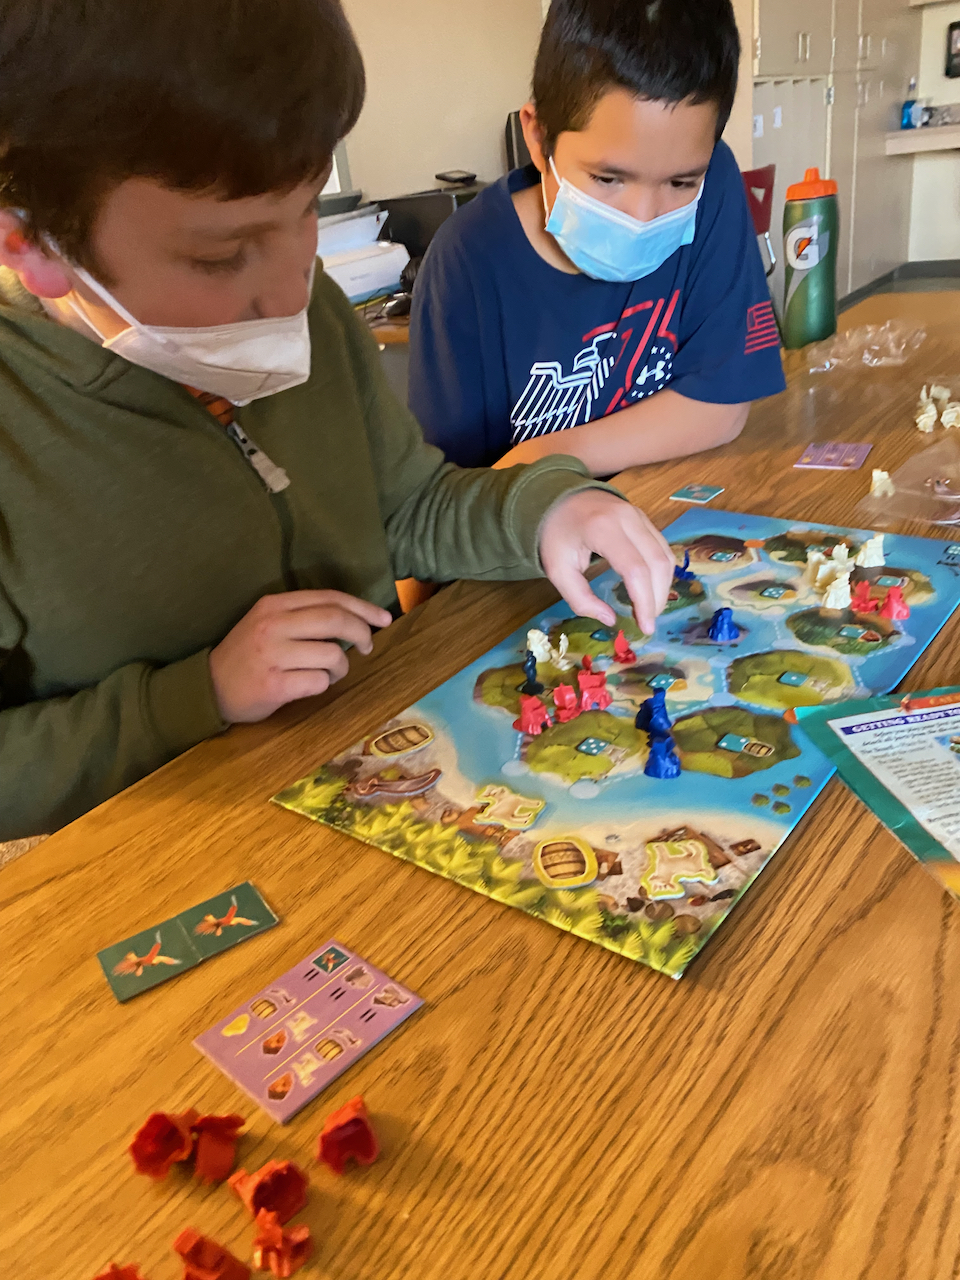 Games In The Classroom: What the Research Says